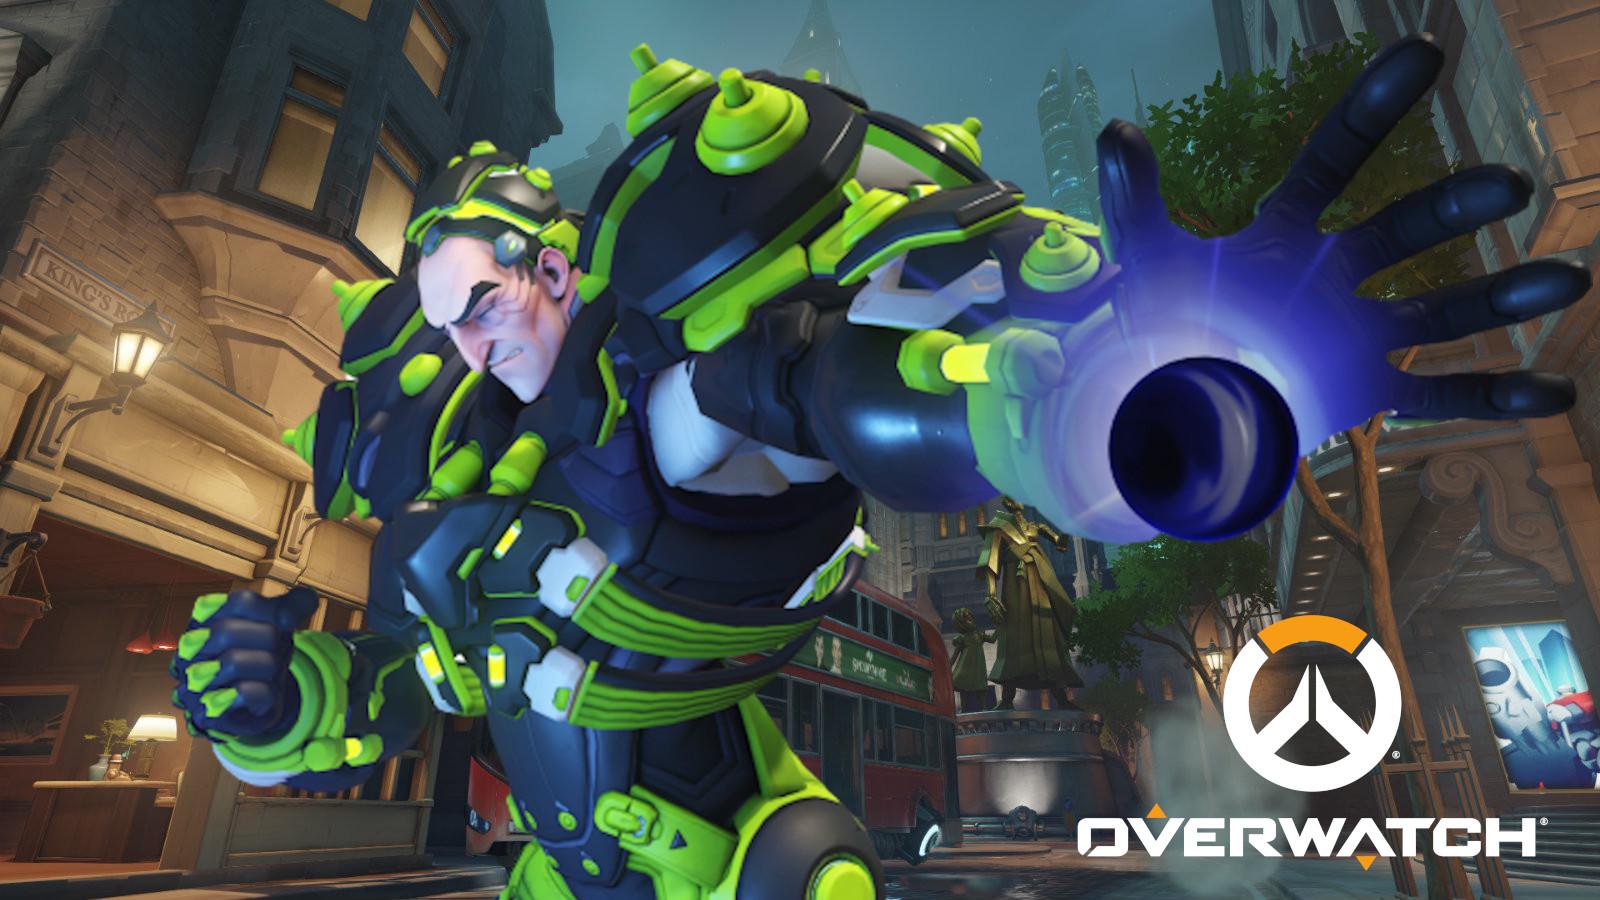 Overwatch tips: How to play Sigma, according to OWL's 'Cr0ng' and